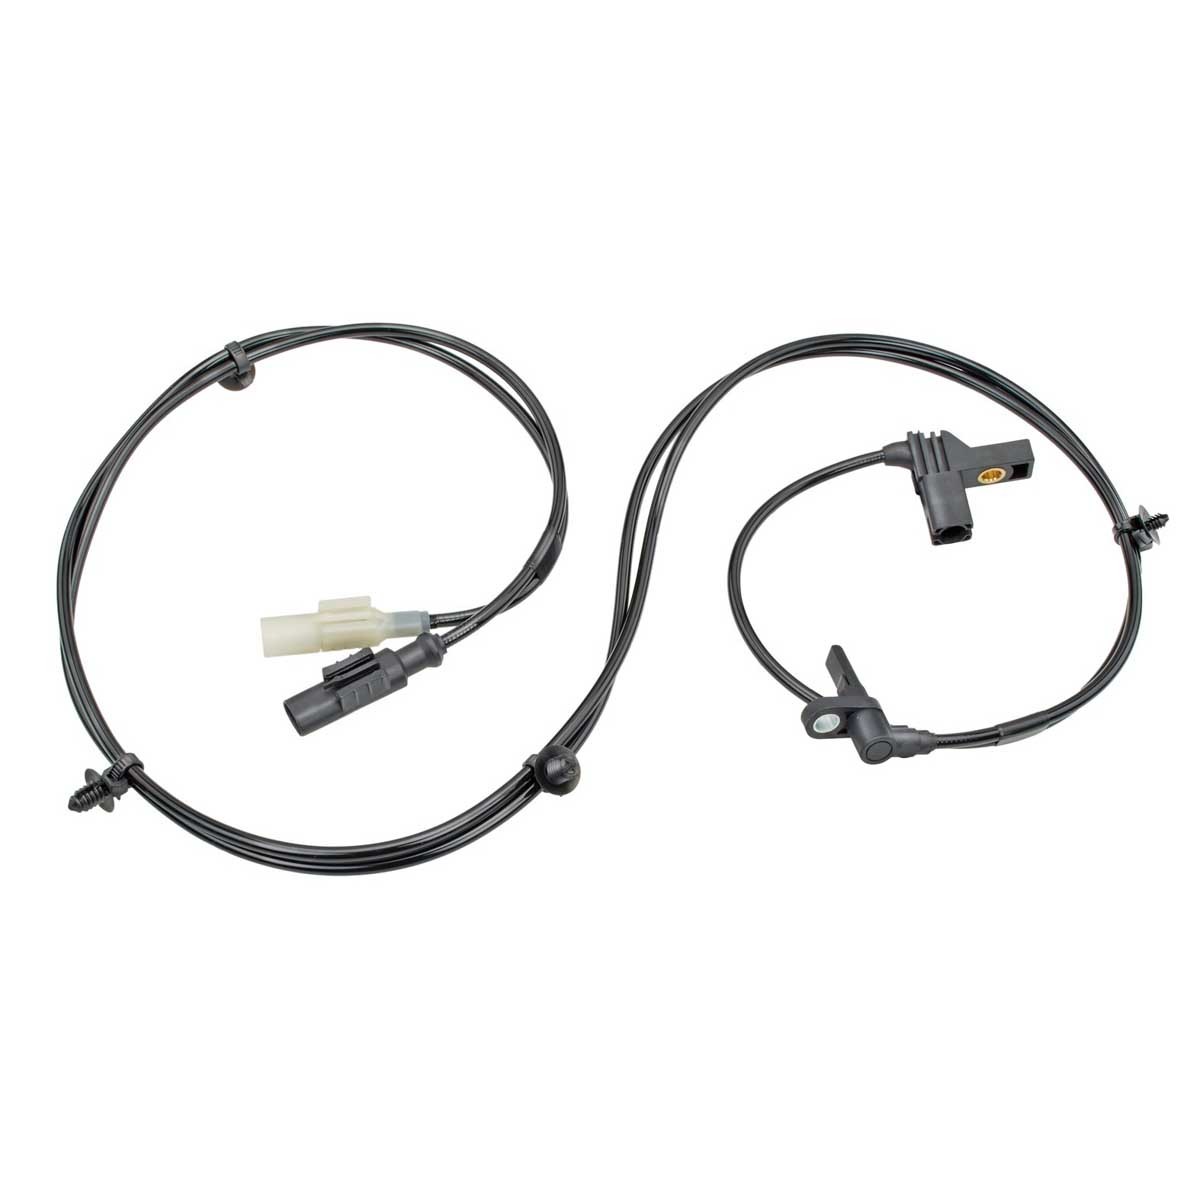 MEYLE 014 899 0082 ABS sensor LAND ROVER experience and price